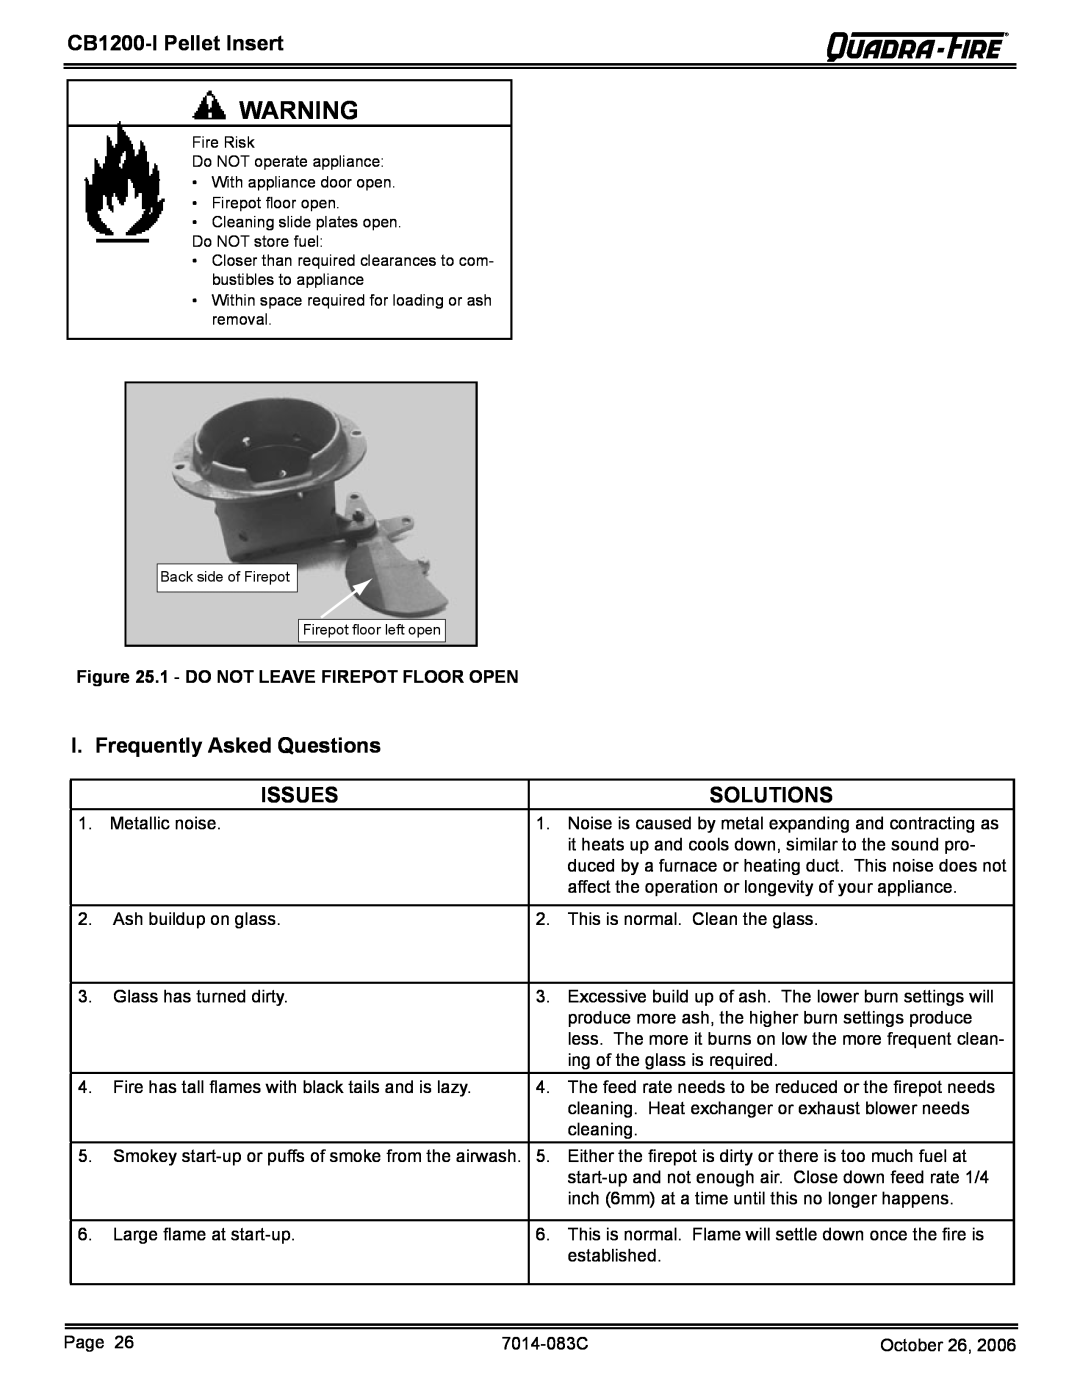 Quadra-Fire CB1200I-B owner manual I. Frequently Asked Questions, Issues, Solutions, CB1200-IPellet Insert 